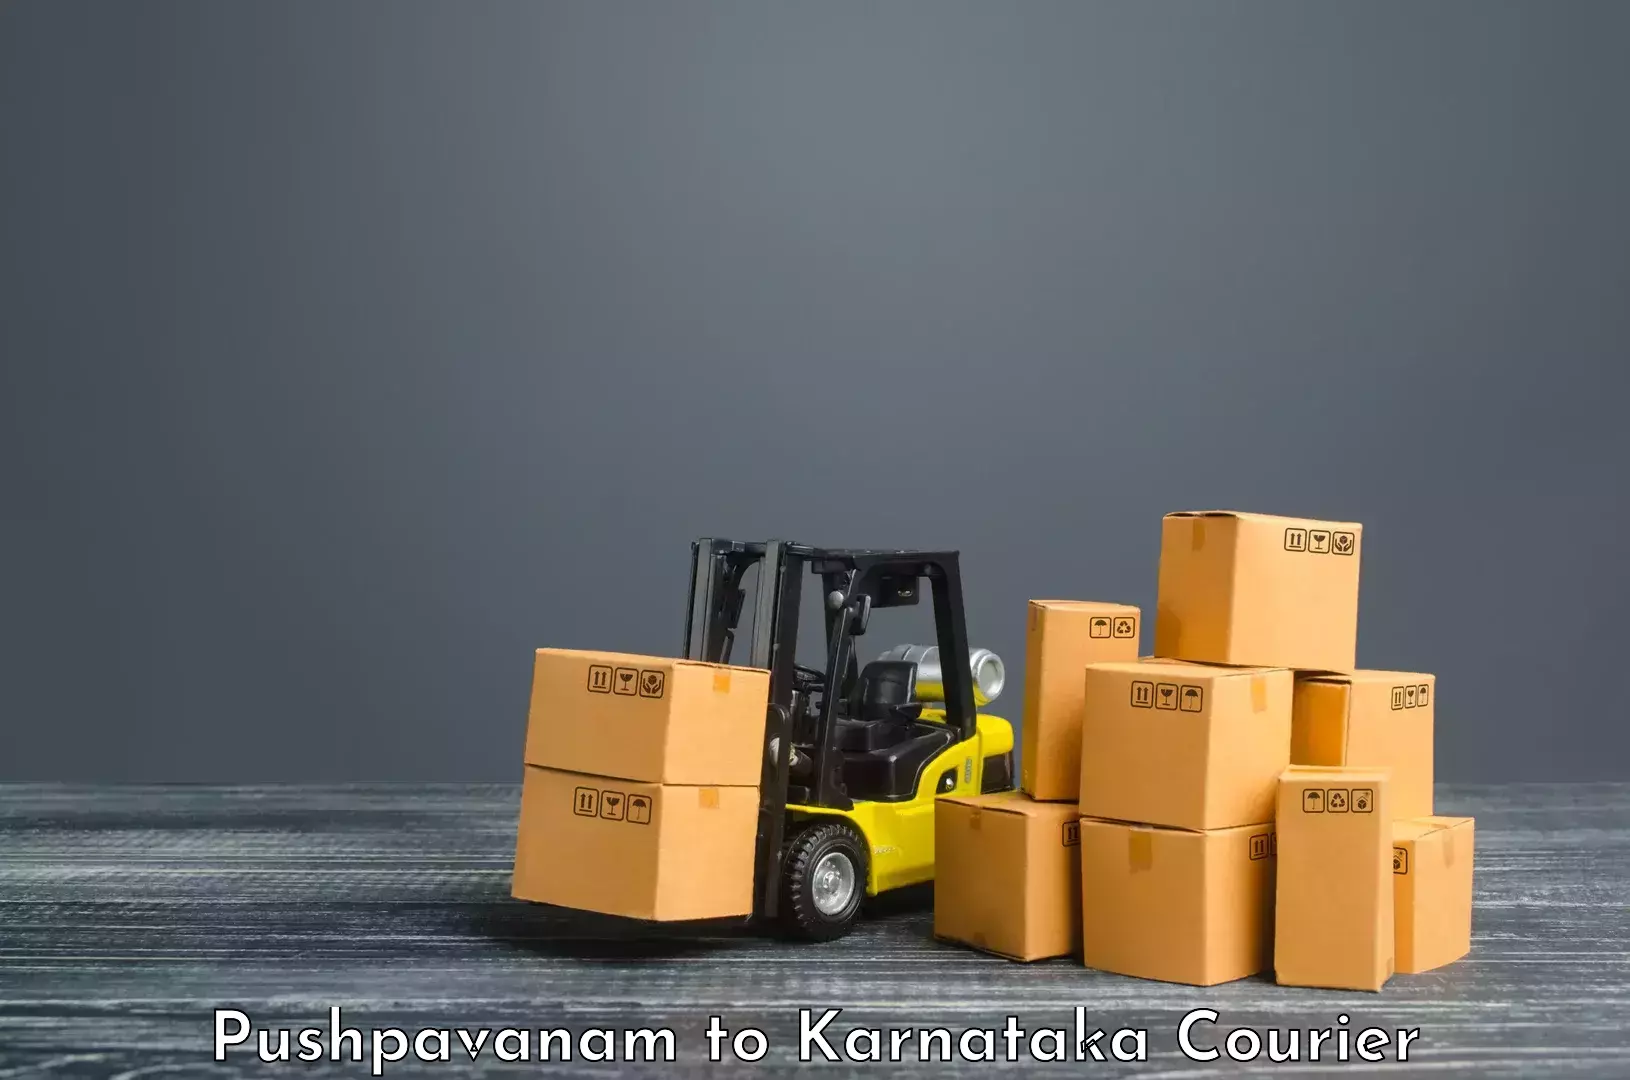 Global shipping networks Pushpavanam to Kollegal